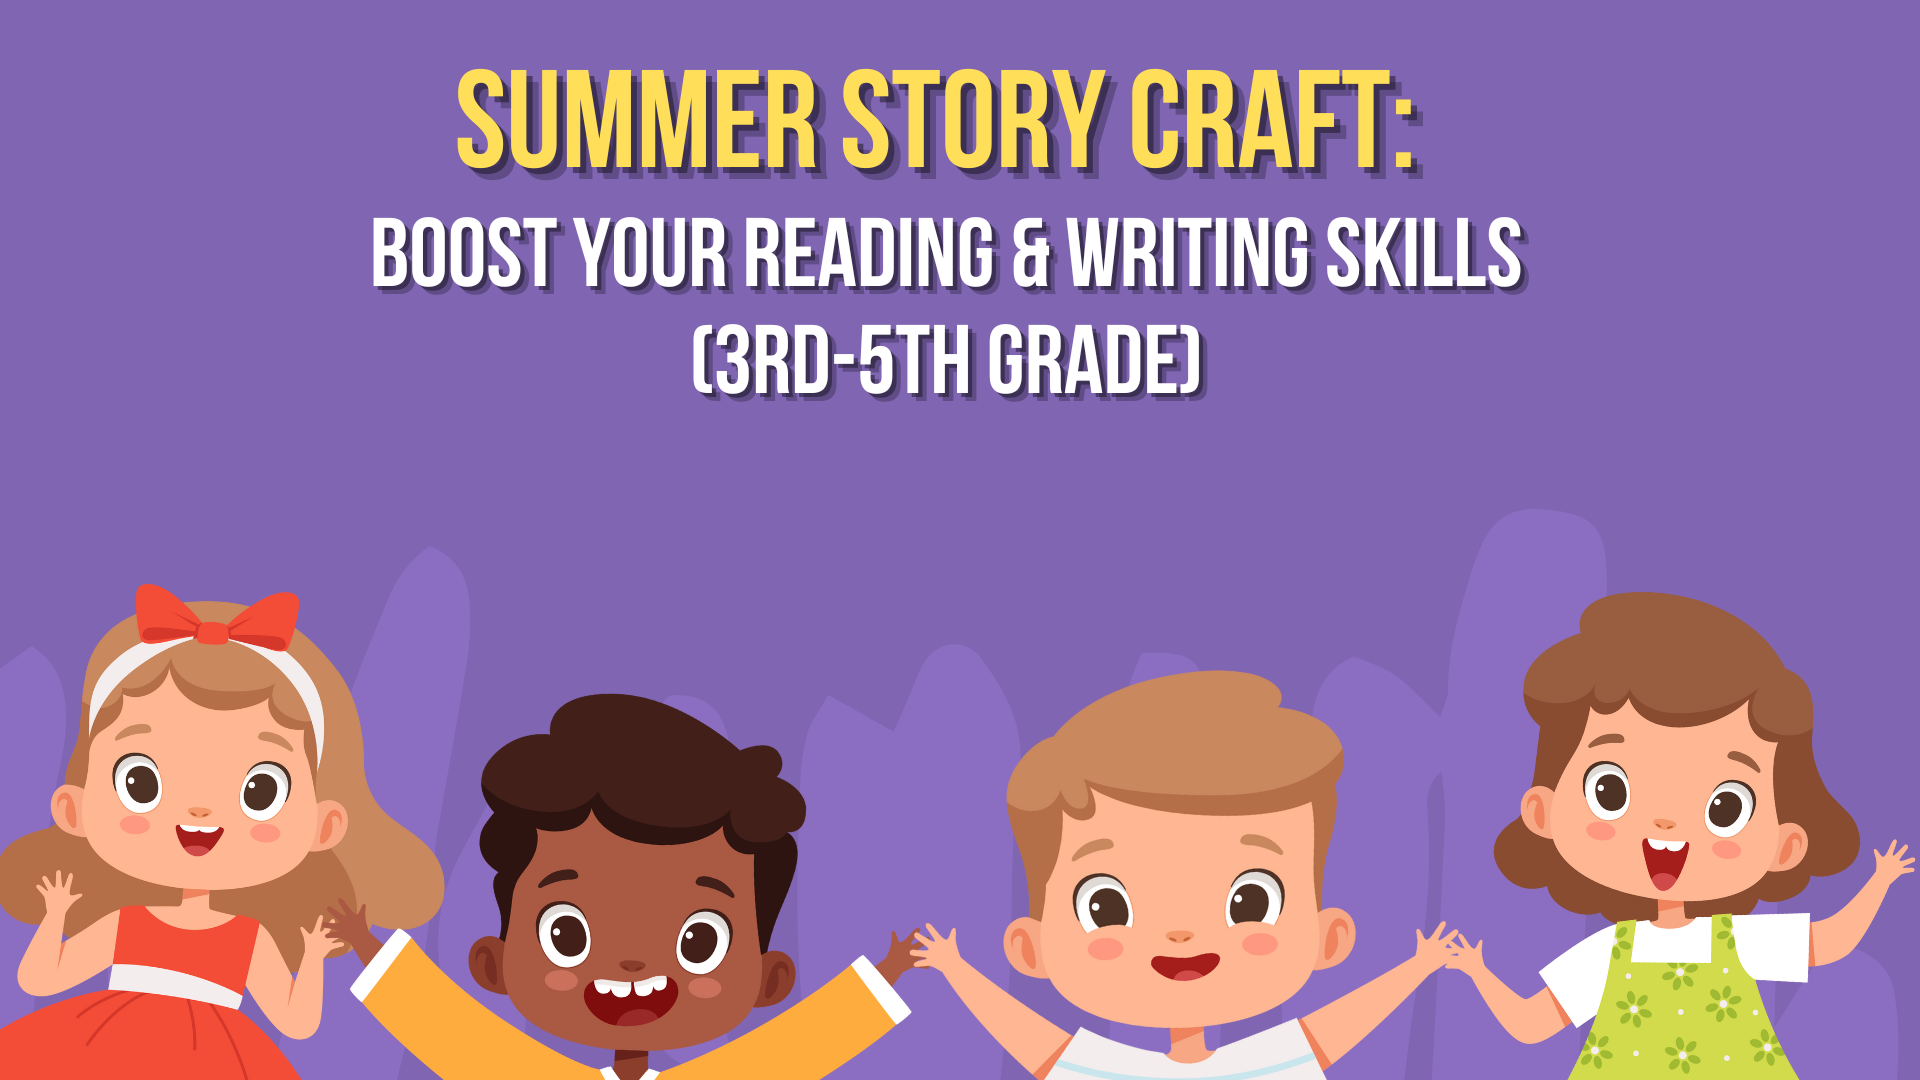 Summer Story craft: Boost Your Reading & Writing Skills (3rd-5th Grade)